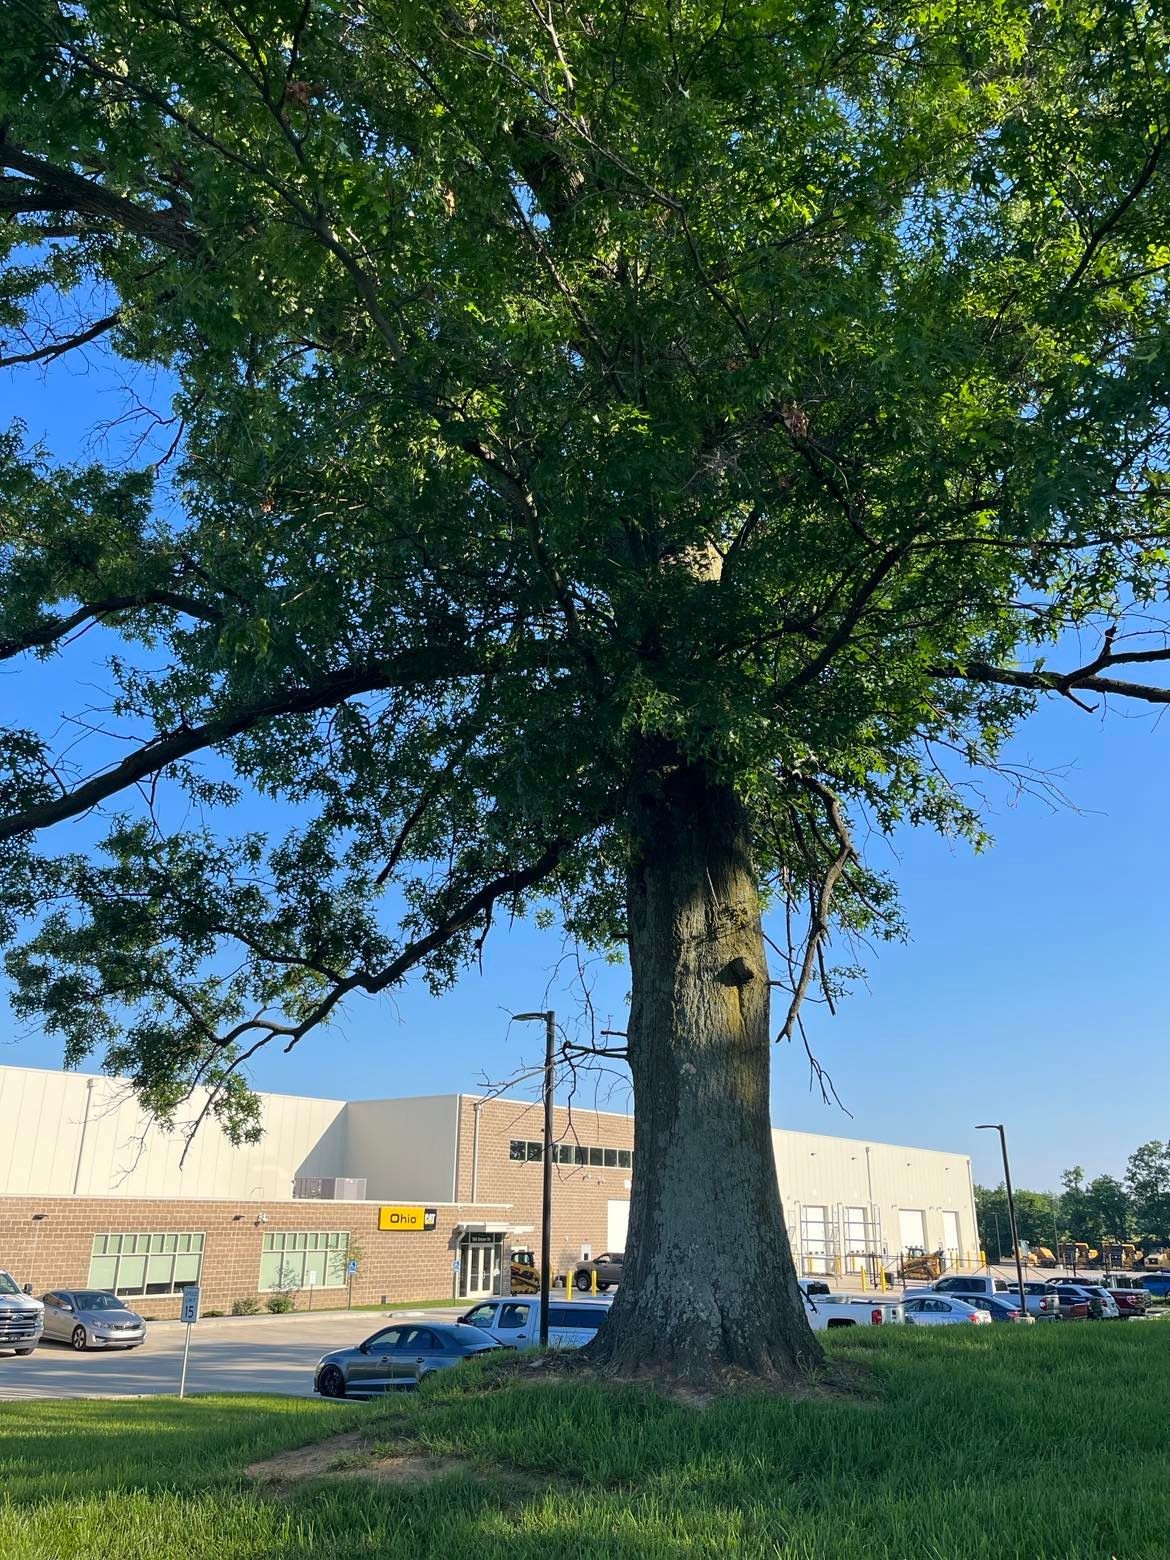 Commercial tree trimming